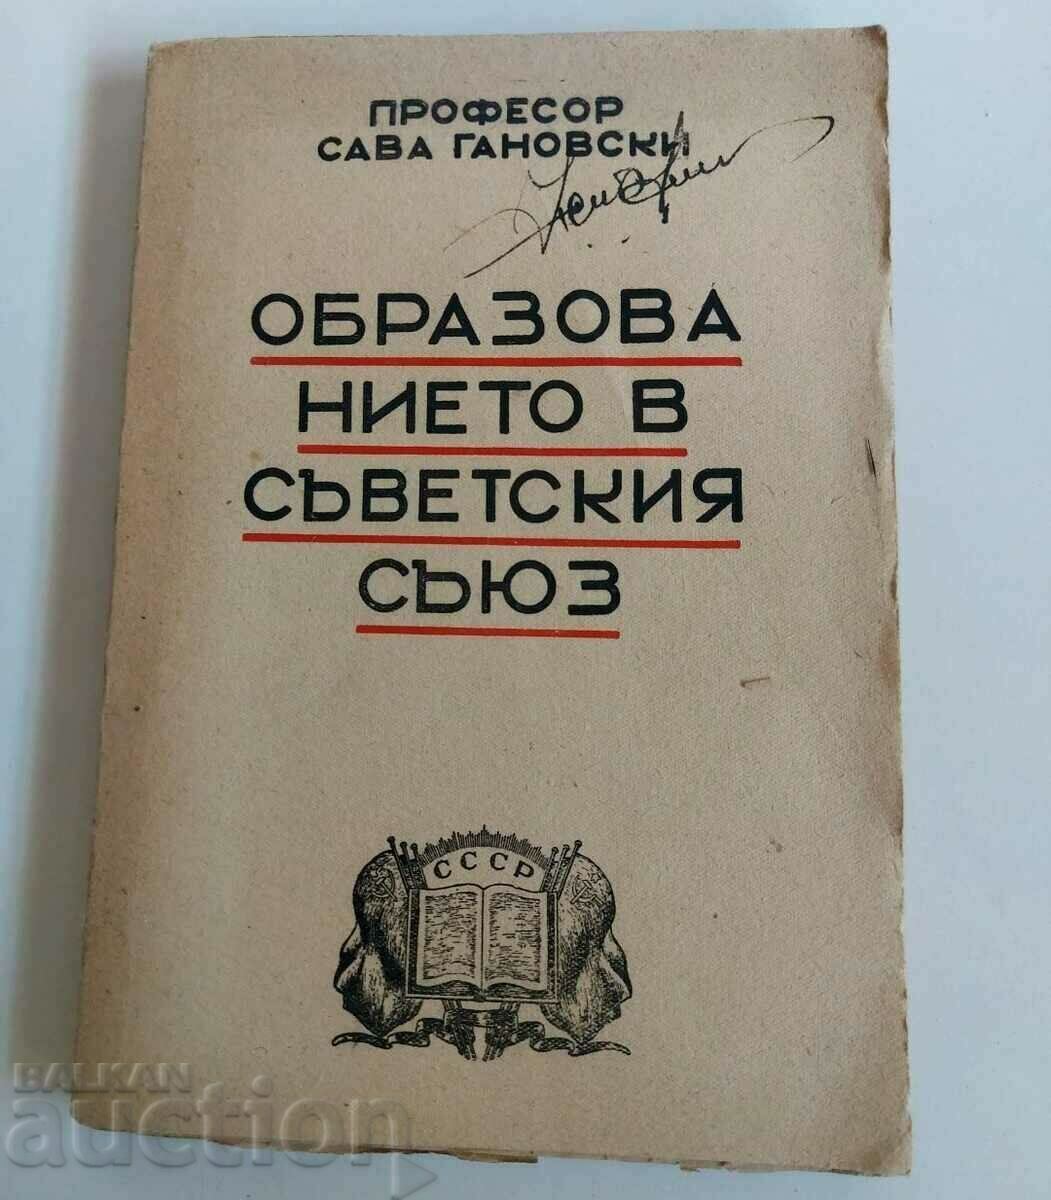 EDUCATION IN THE SOVIET UNION